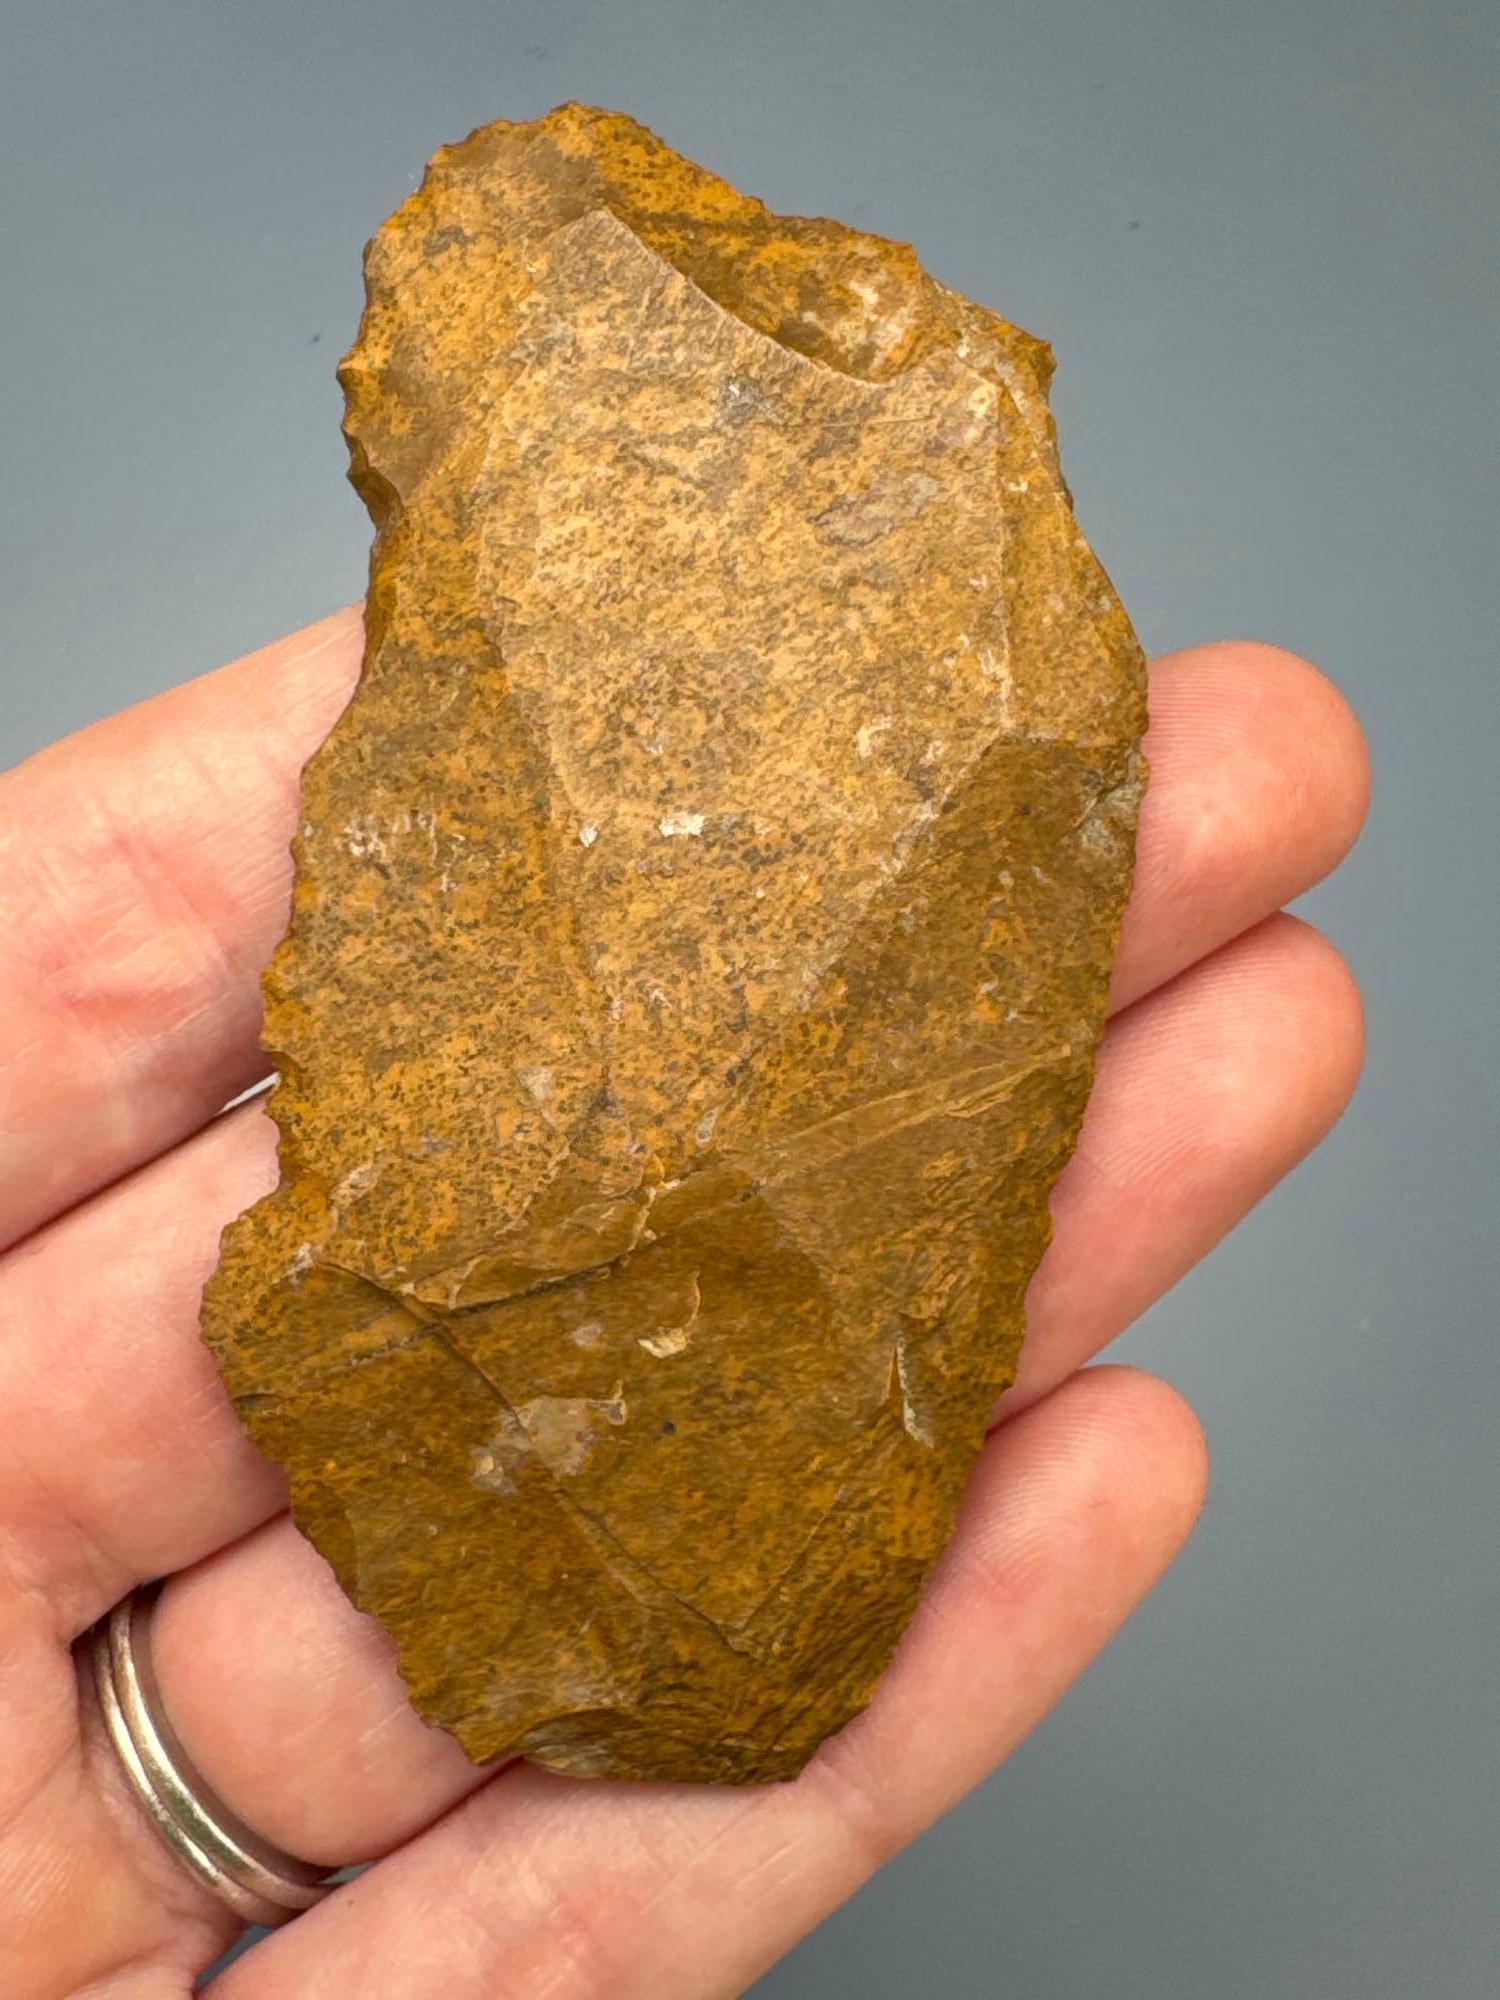 SUPERB 3" Jasper Flake Tool, Nice Edge Flaking, Found in New York State, Ex: Dave Summers Collection